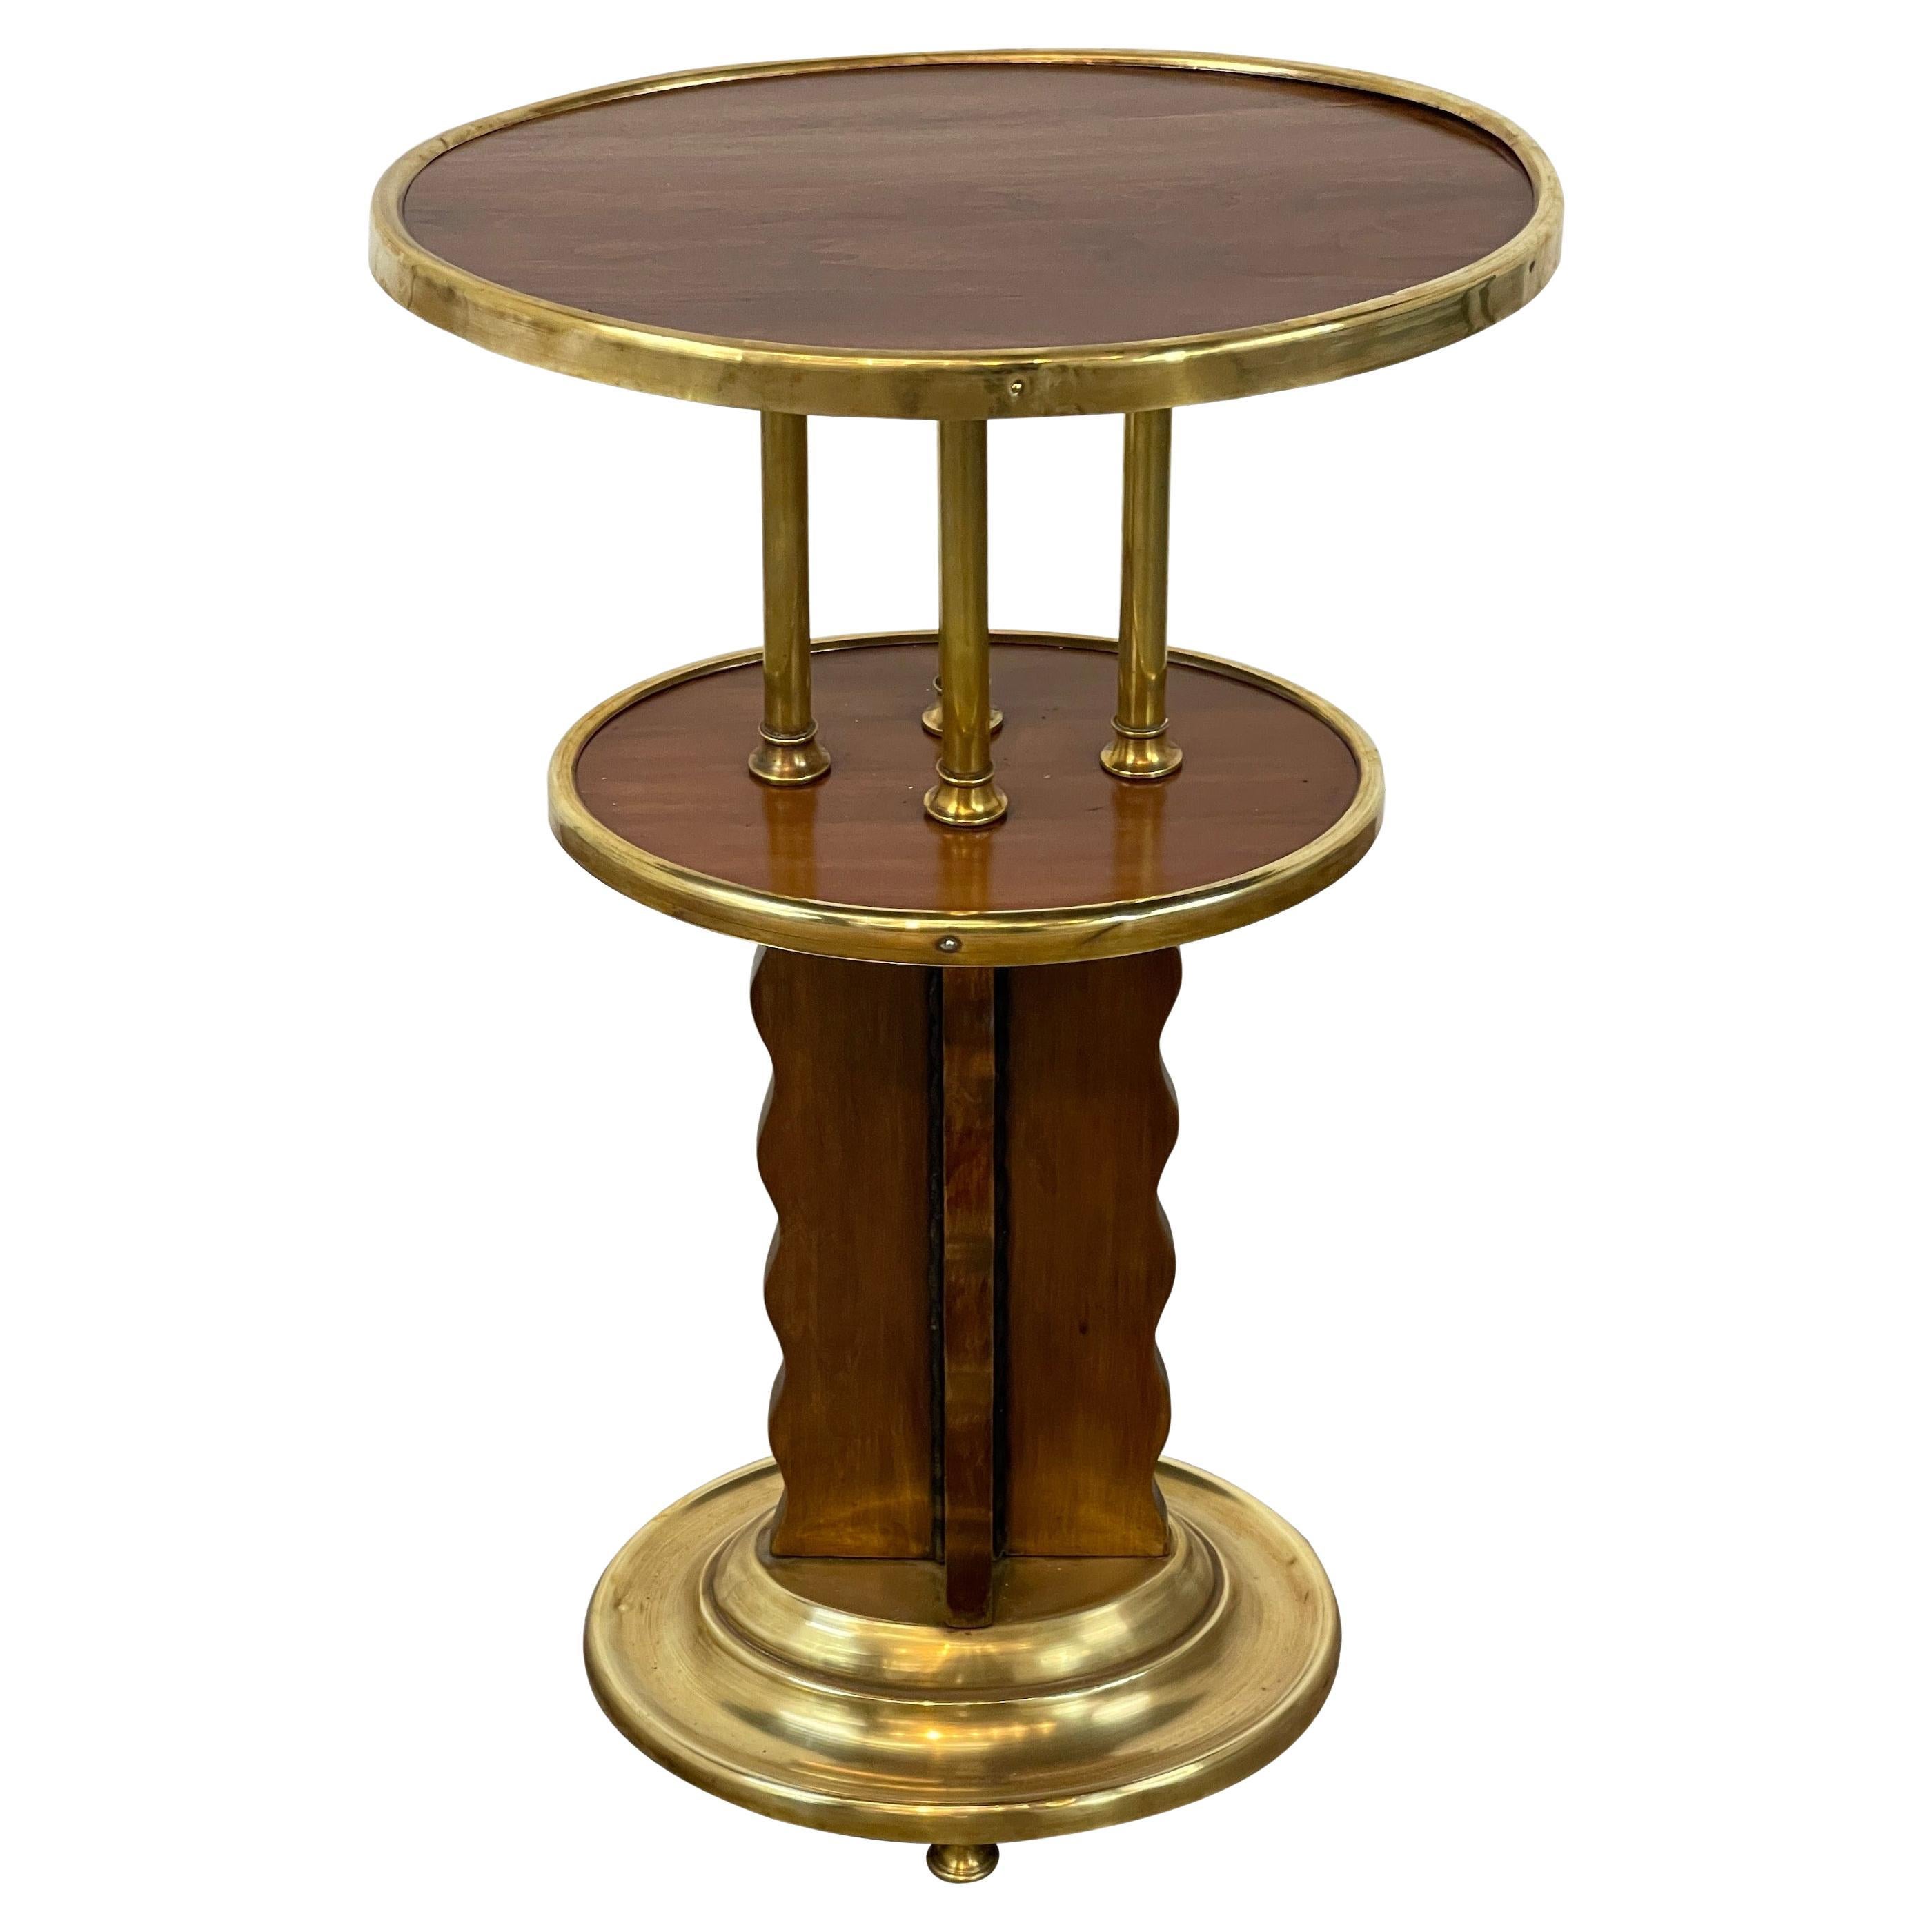 Viennese Secession Brass Mounted Hardwood Side Table, Austria C. 1920